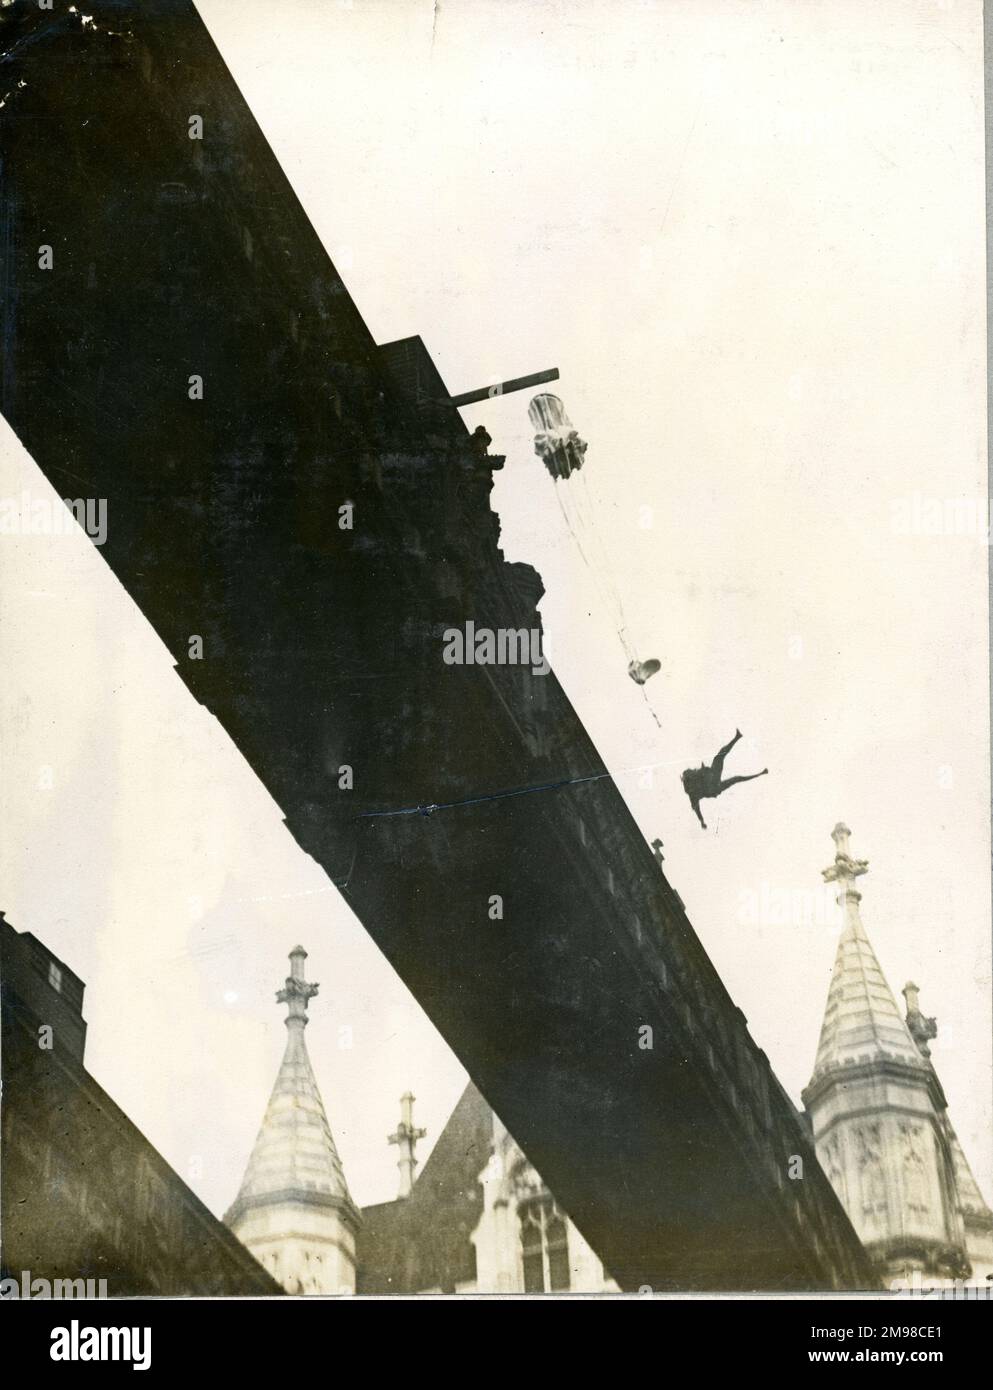 Lt Col Orde Lees diving head first from Tower Bridge to demonstrate a Guardian Angel parachute, 11 November 1917. Stock Photo